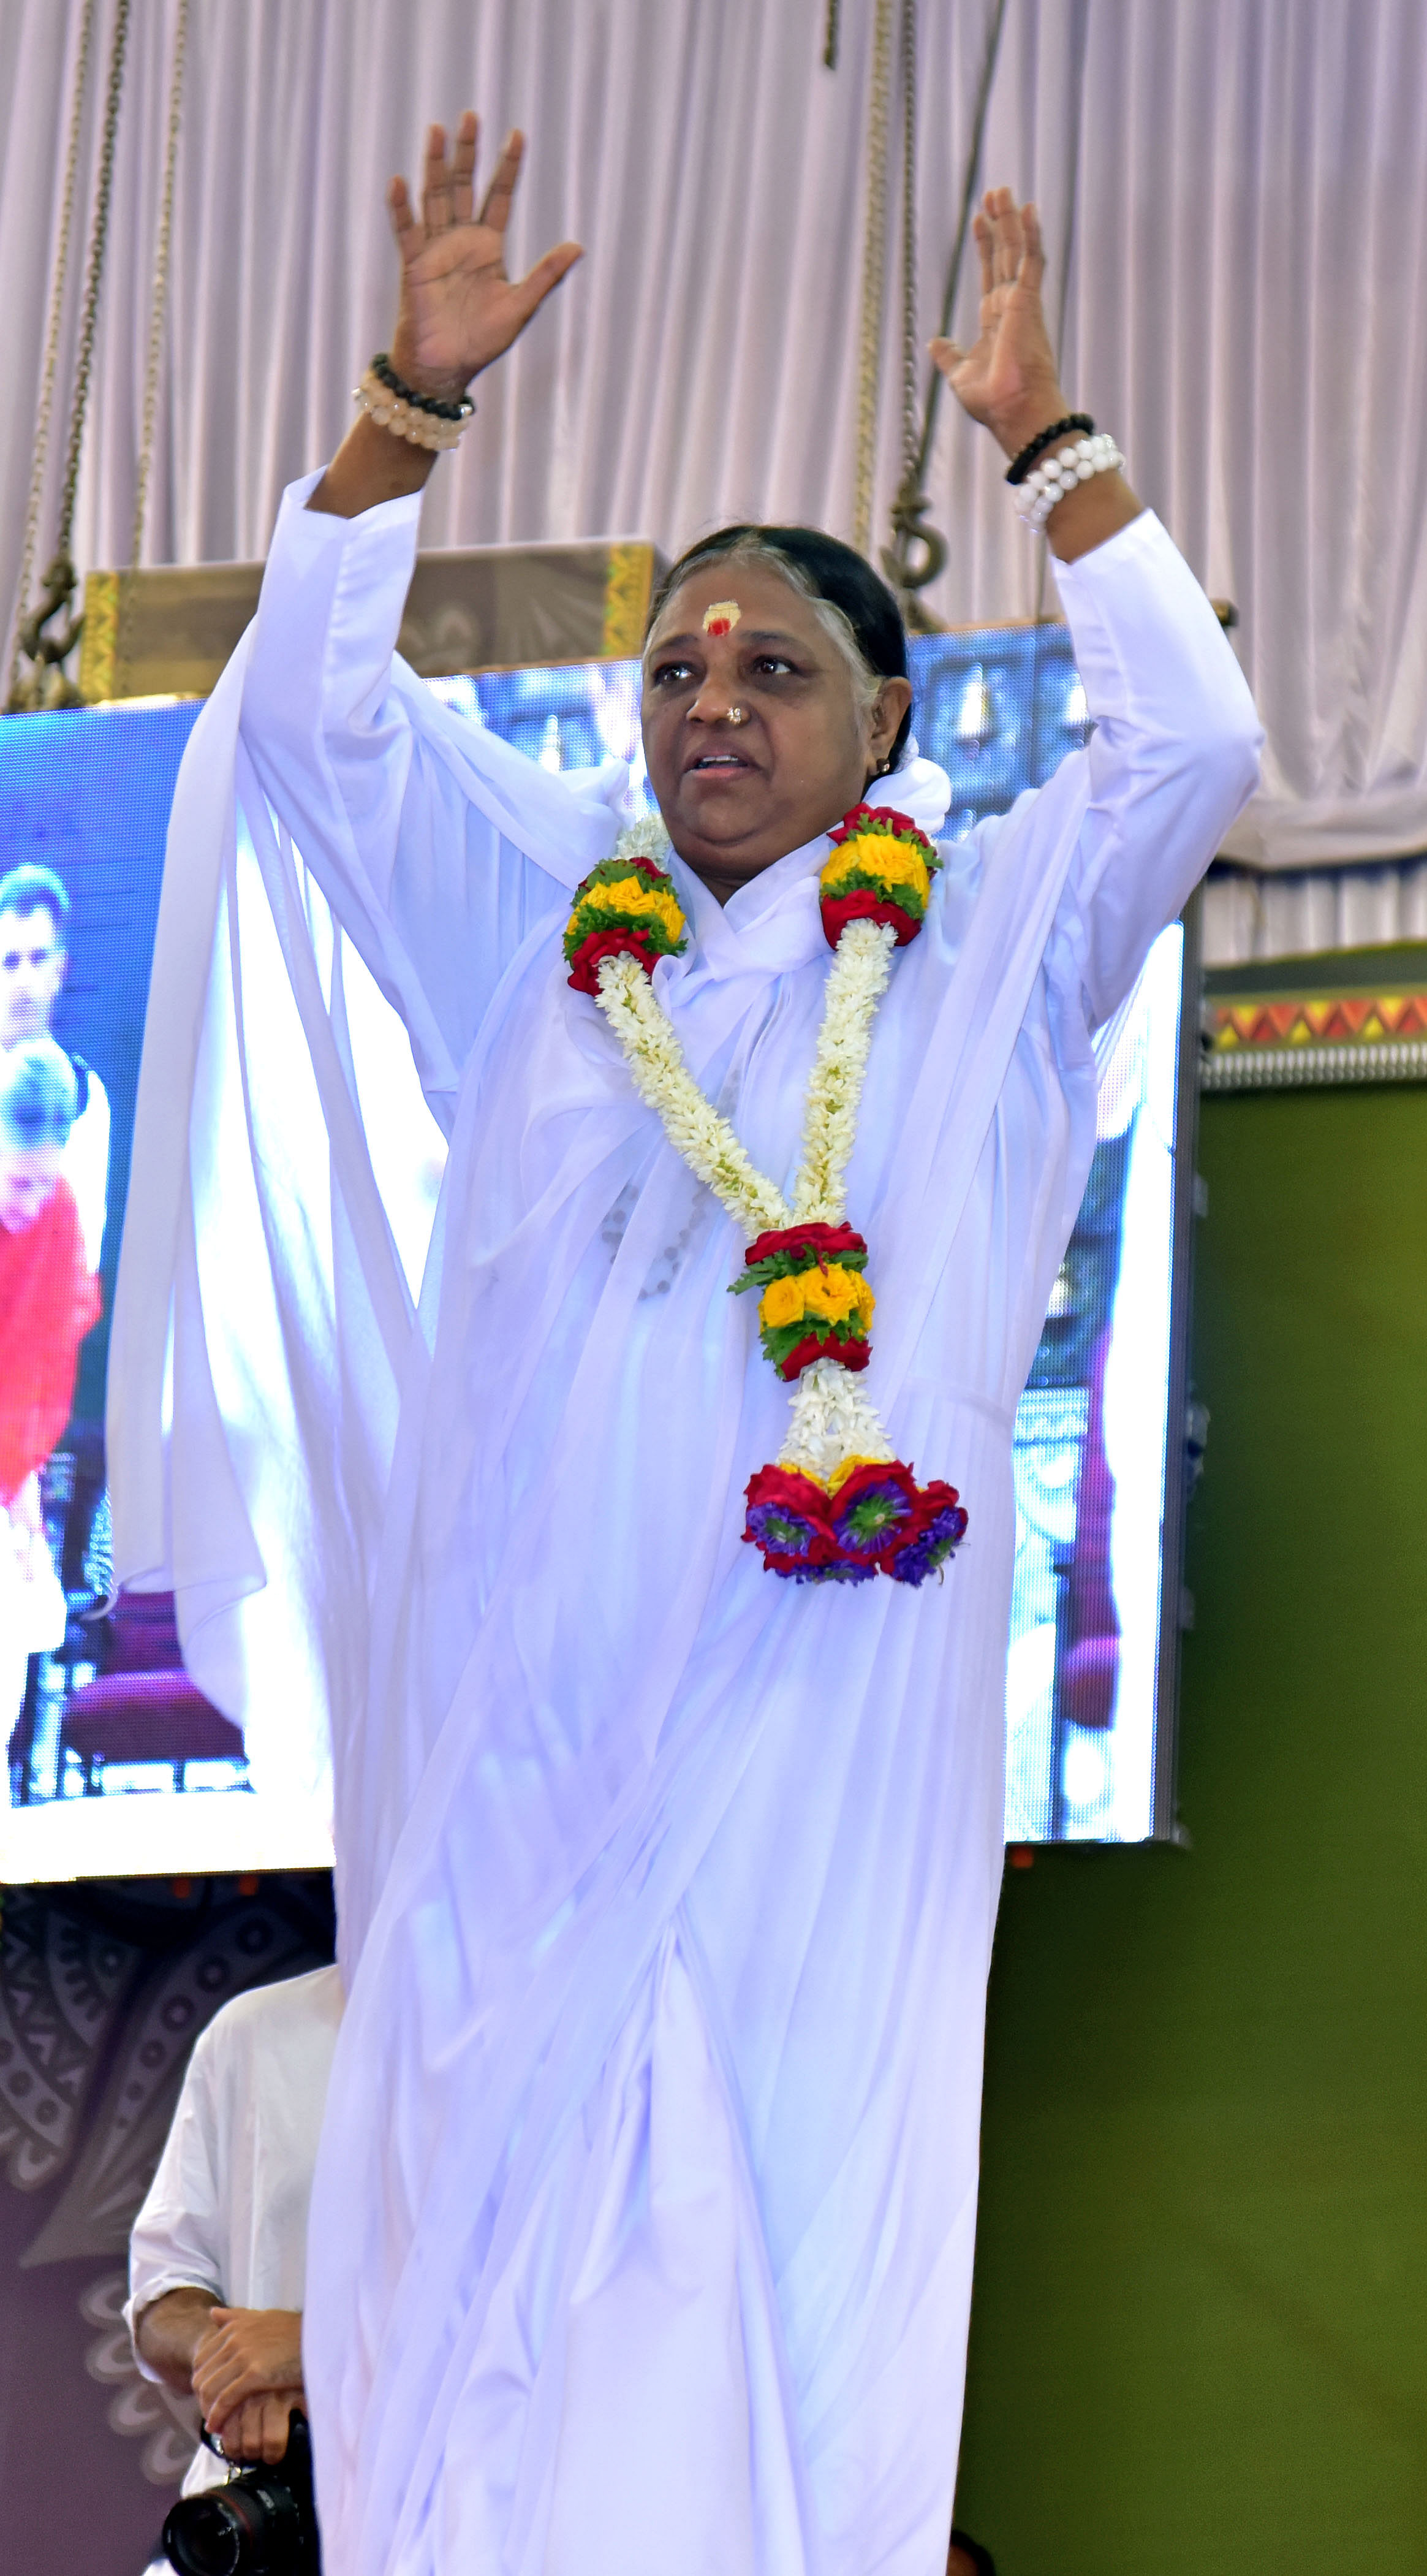 Usually, around 3,000 devotees have darshan of Mata Amritanandamayi daily and most of them get a close darshan too. (Credit: DH Photo)